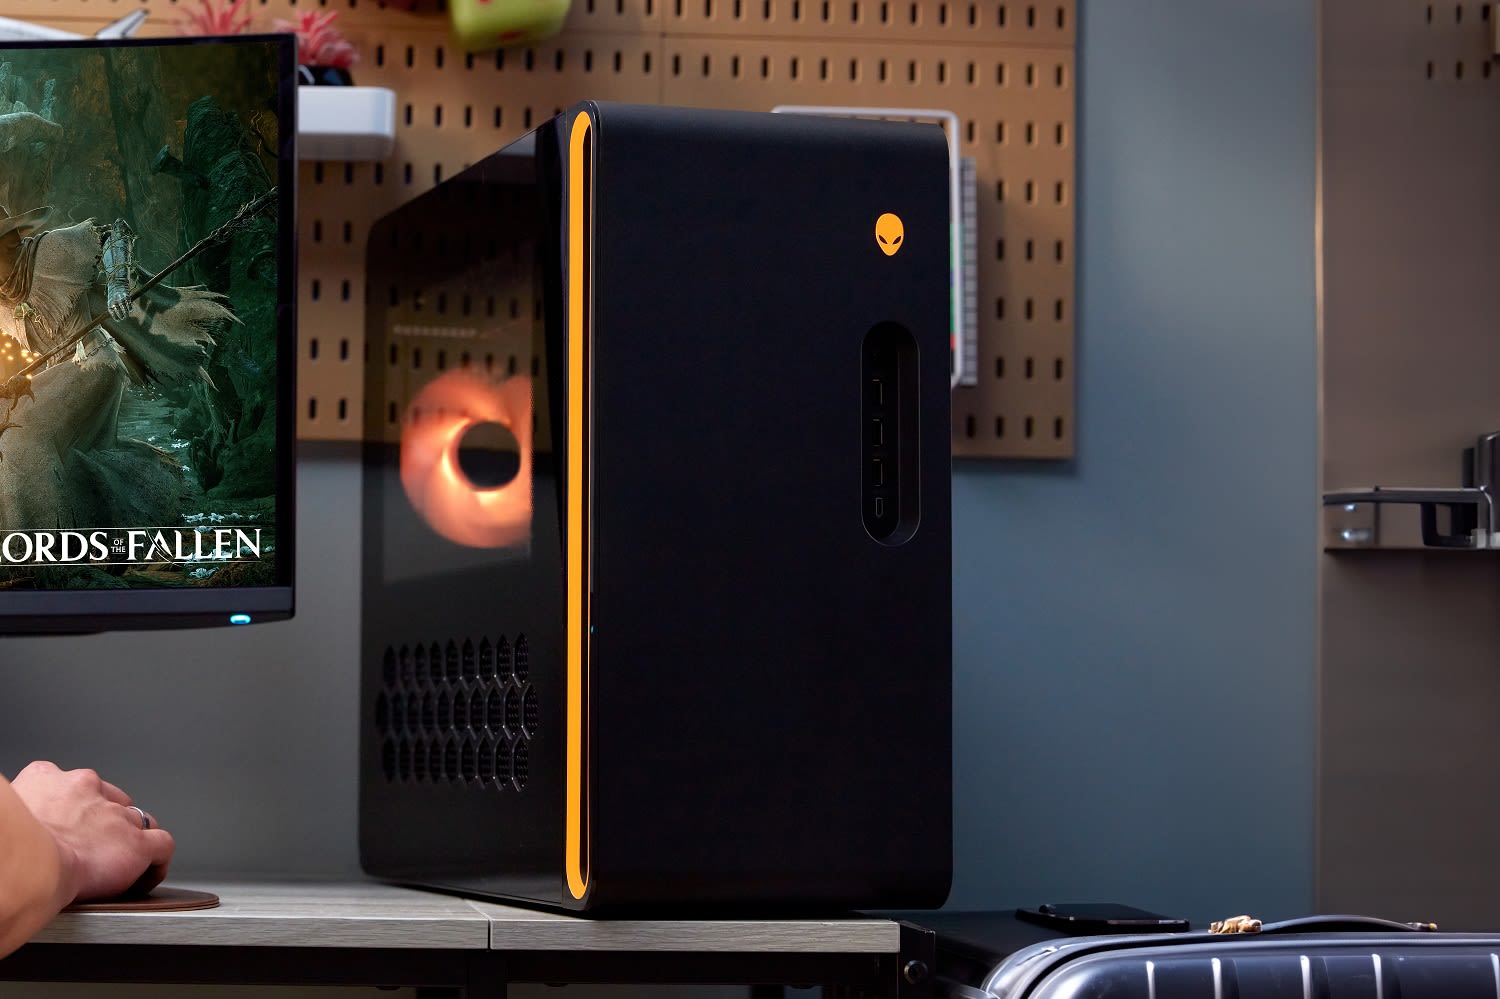 This Alienware gaming PC has a $400 price cut today